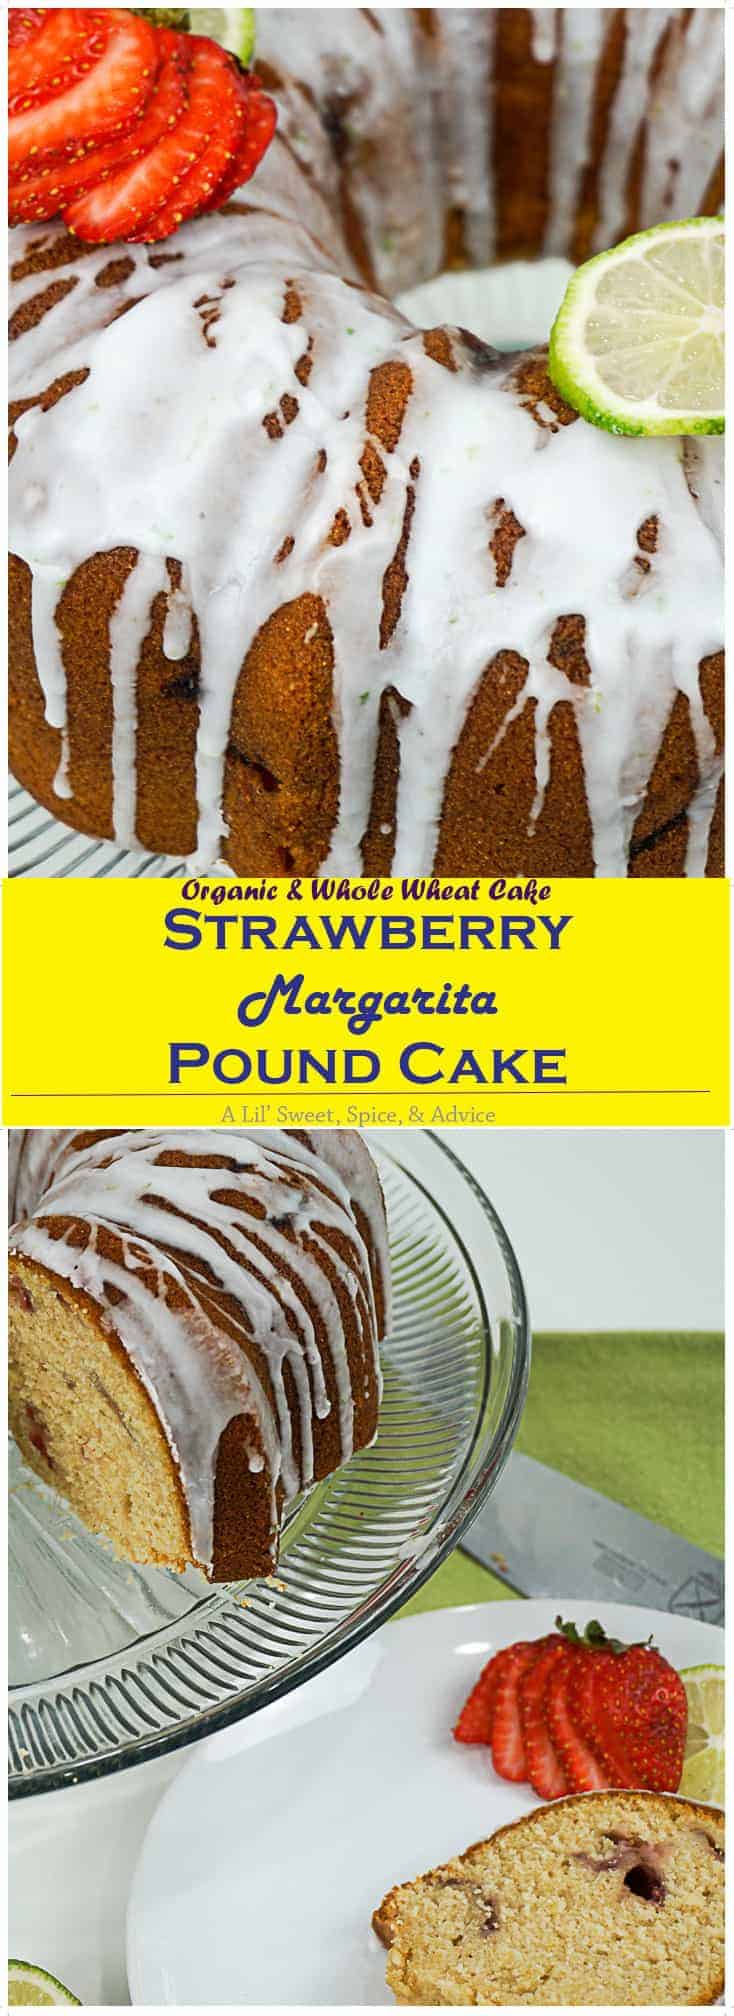 The BEST Strawberry Margarita Pound Cake | A Lil' Sweet, Spice, & Advice